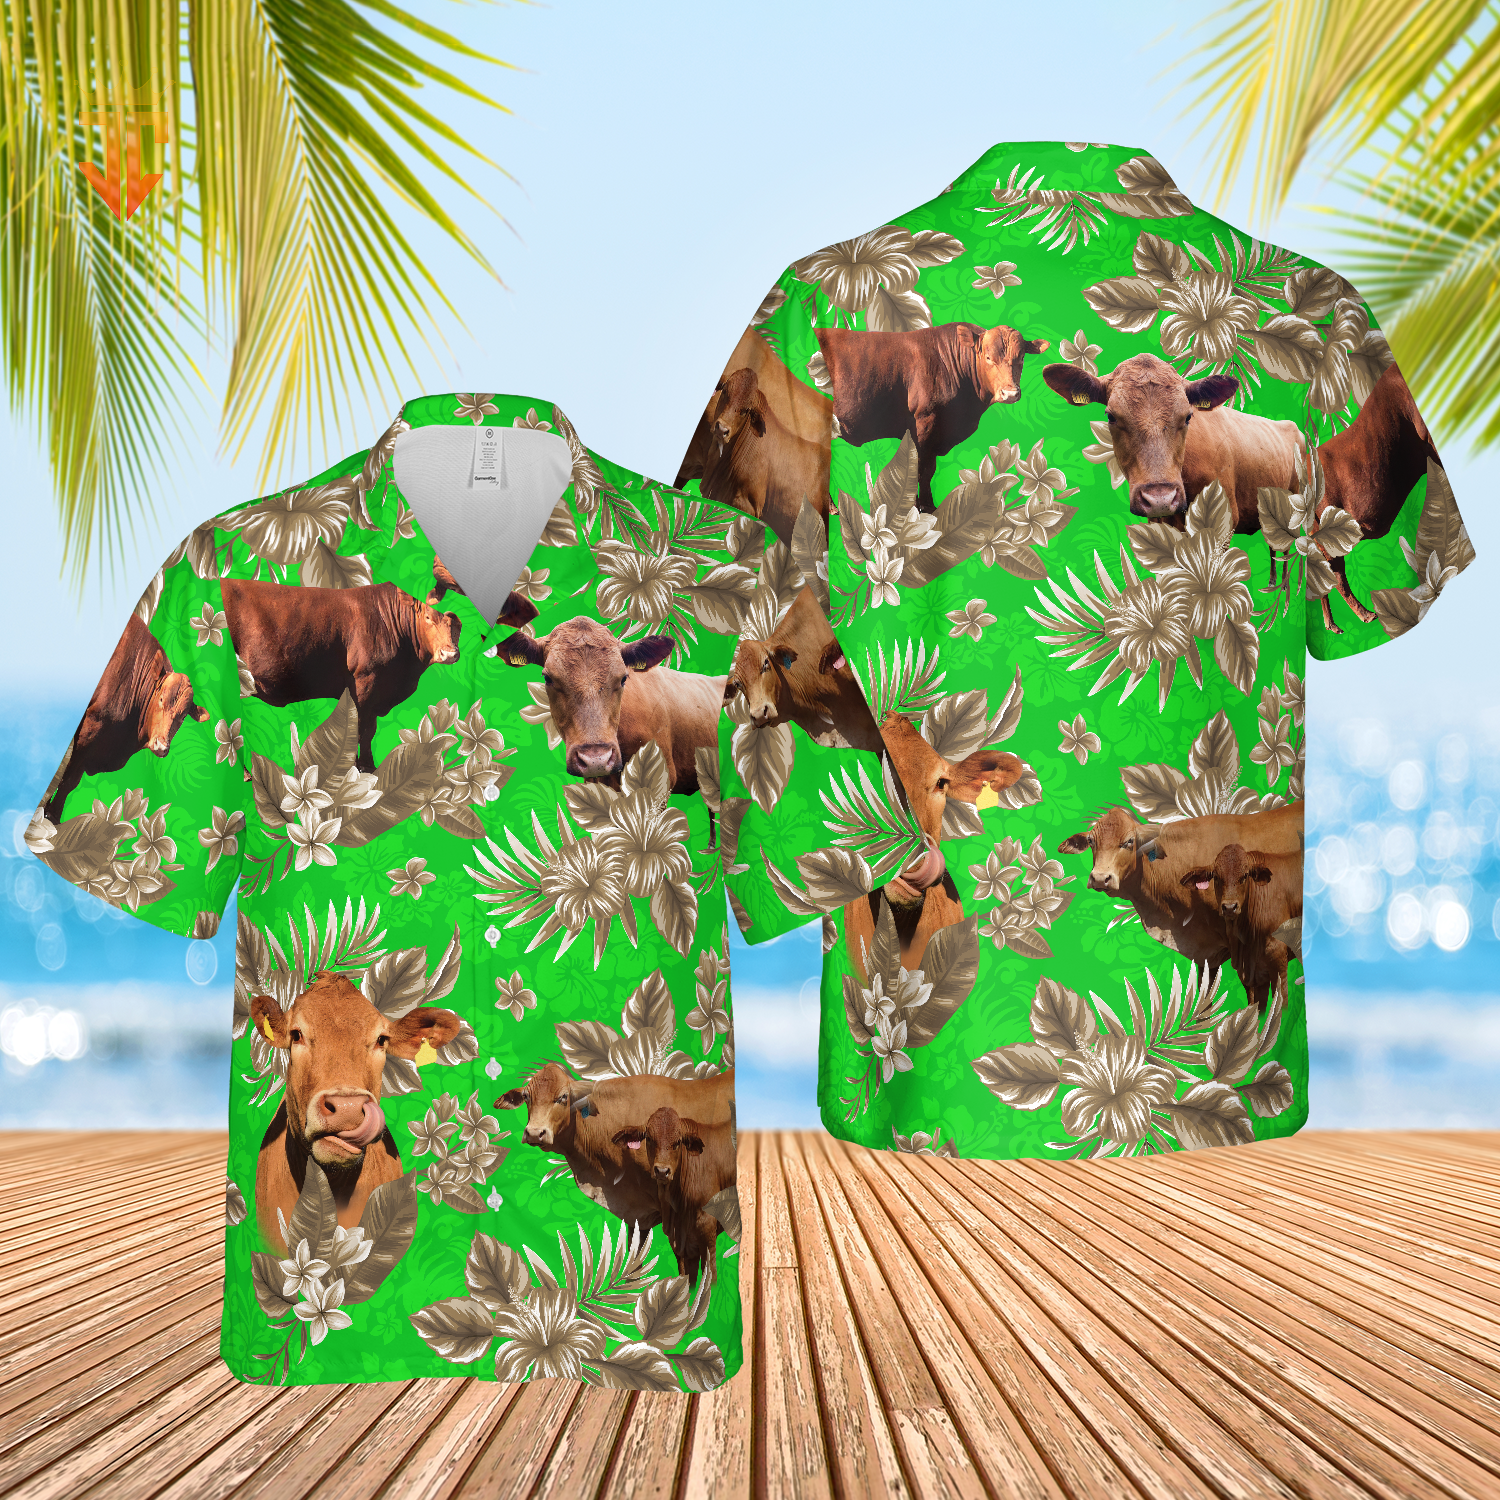 Red Angus Cattle Lovers Aloha Pattern All Over Printed 3D Hawaiian Shirt